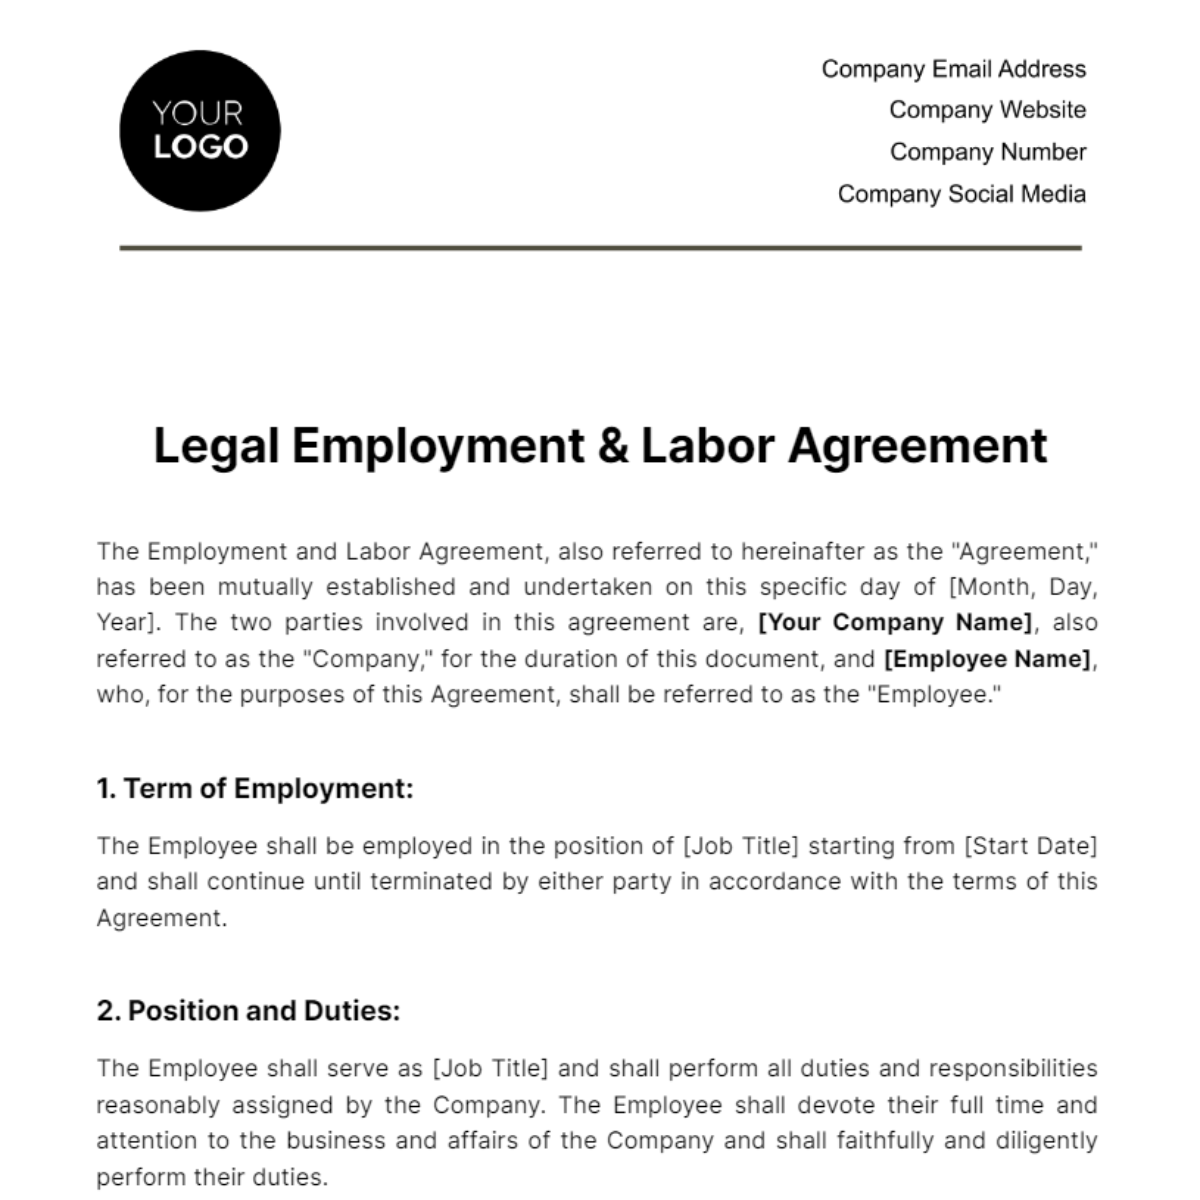 Free Legal Employment & Labor Agreement Template